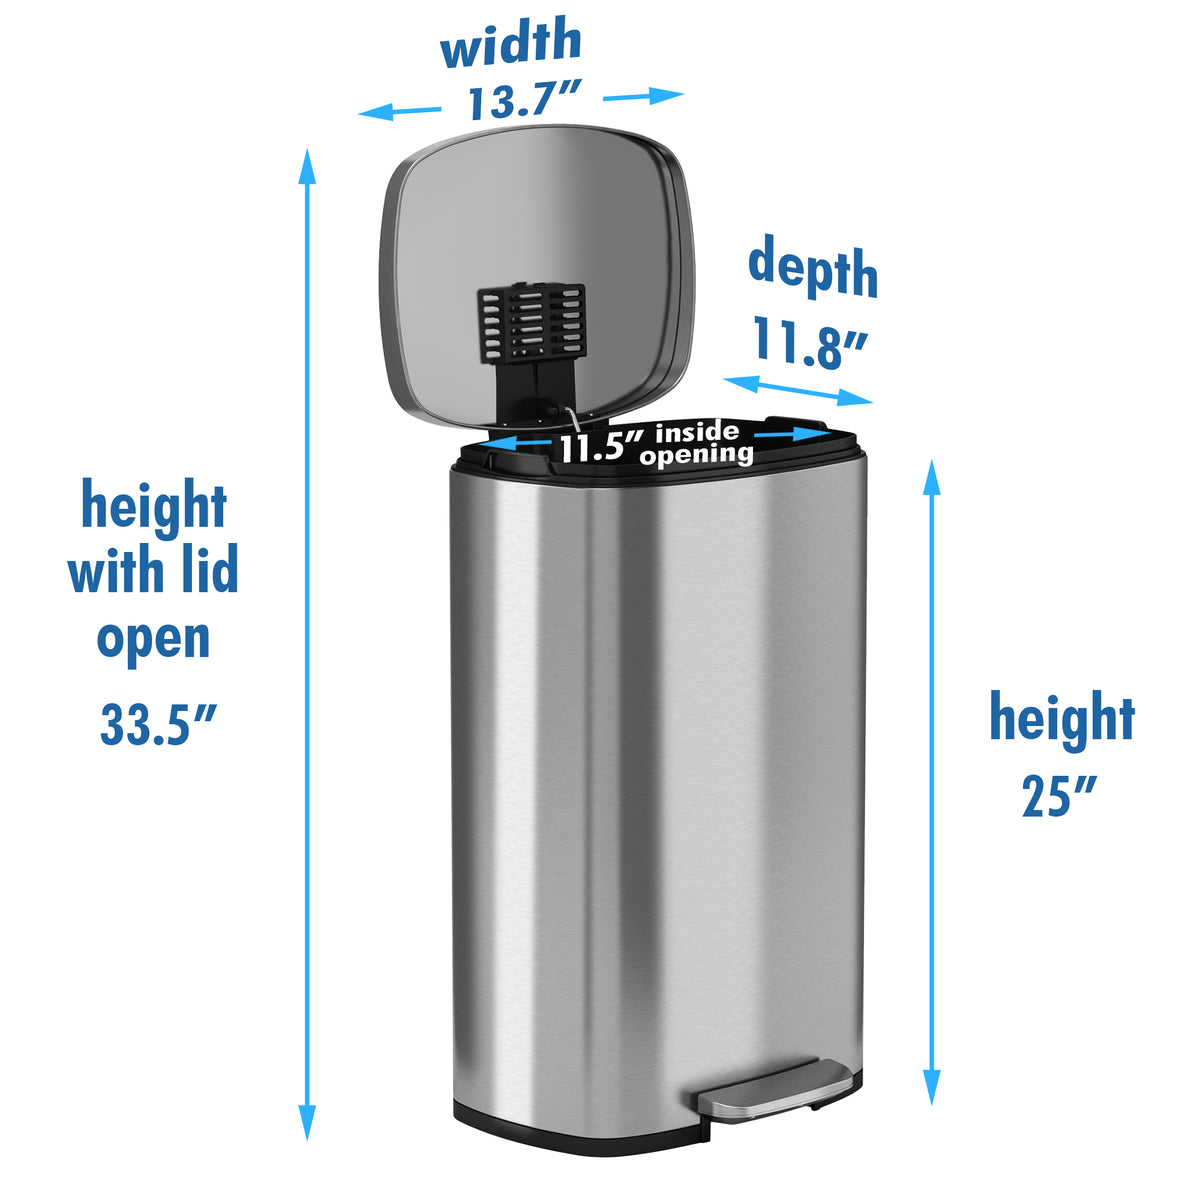 Heavy Duty Plastic 30-Gallon Kitchen Trash Can with Easy Open Lid